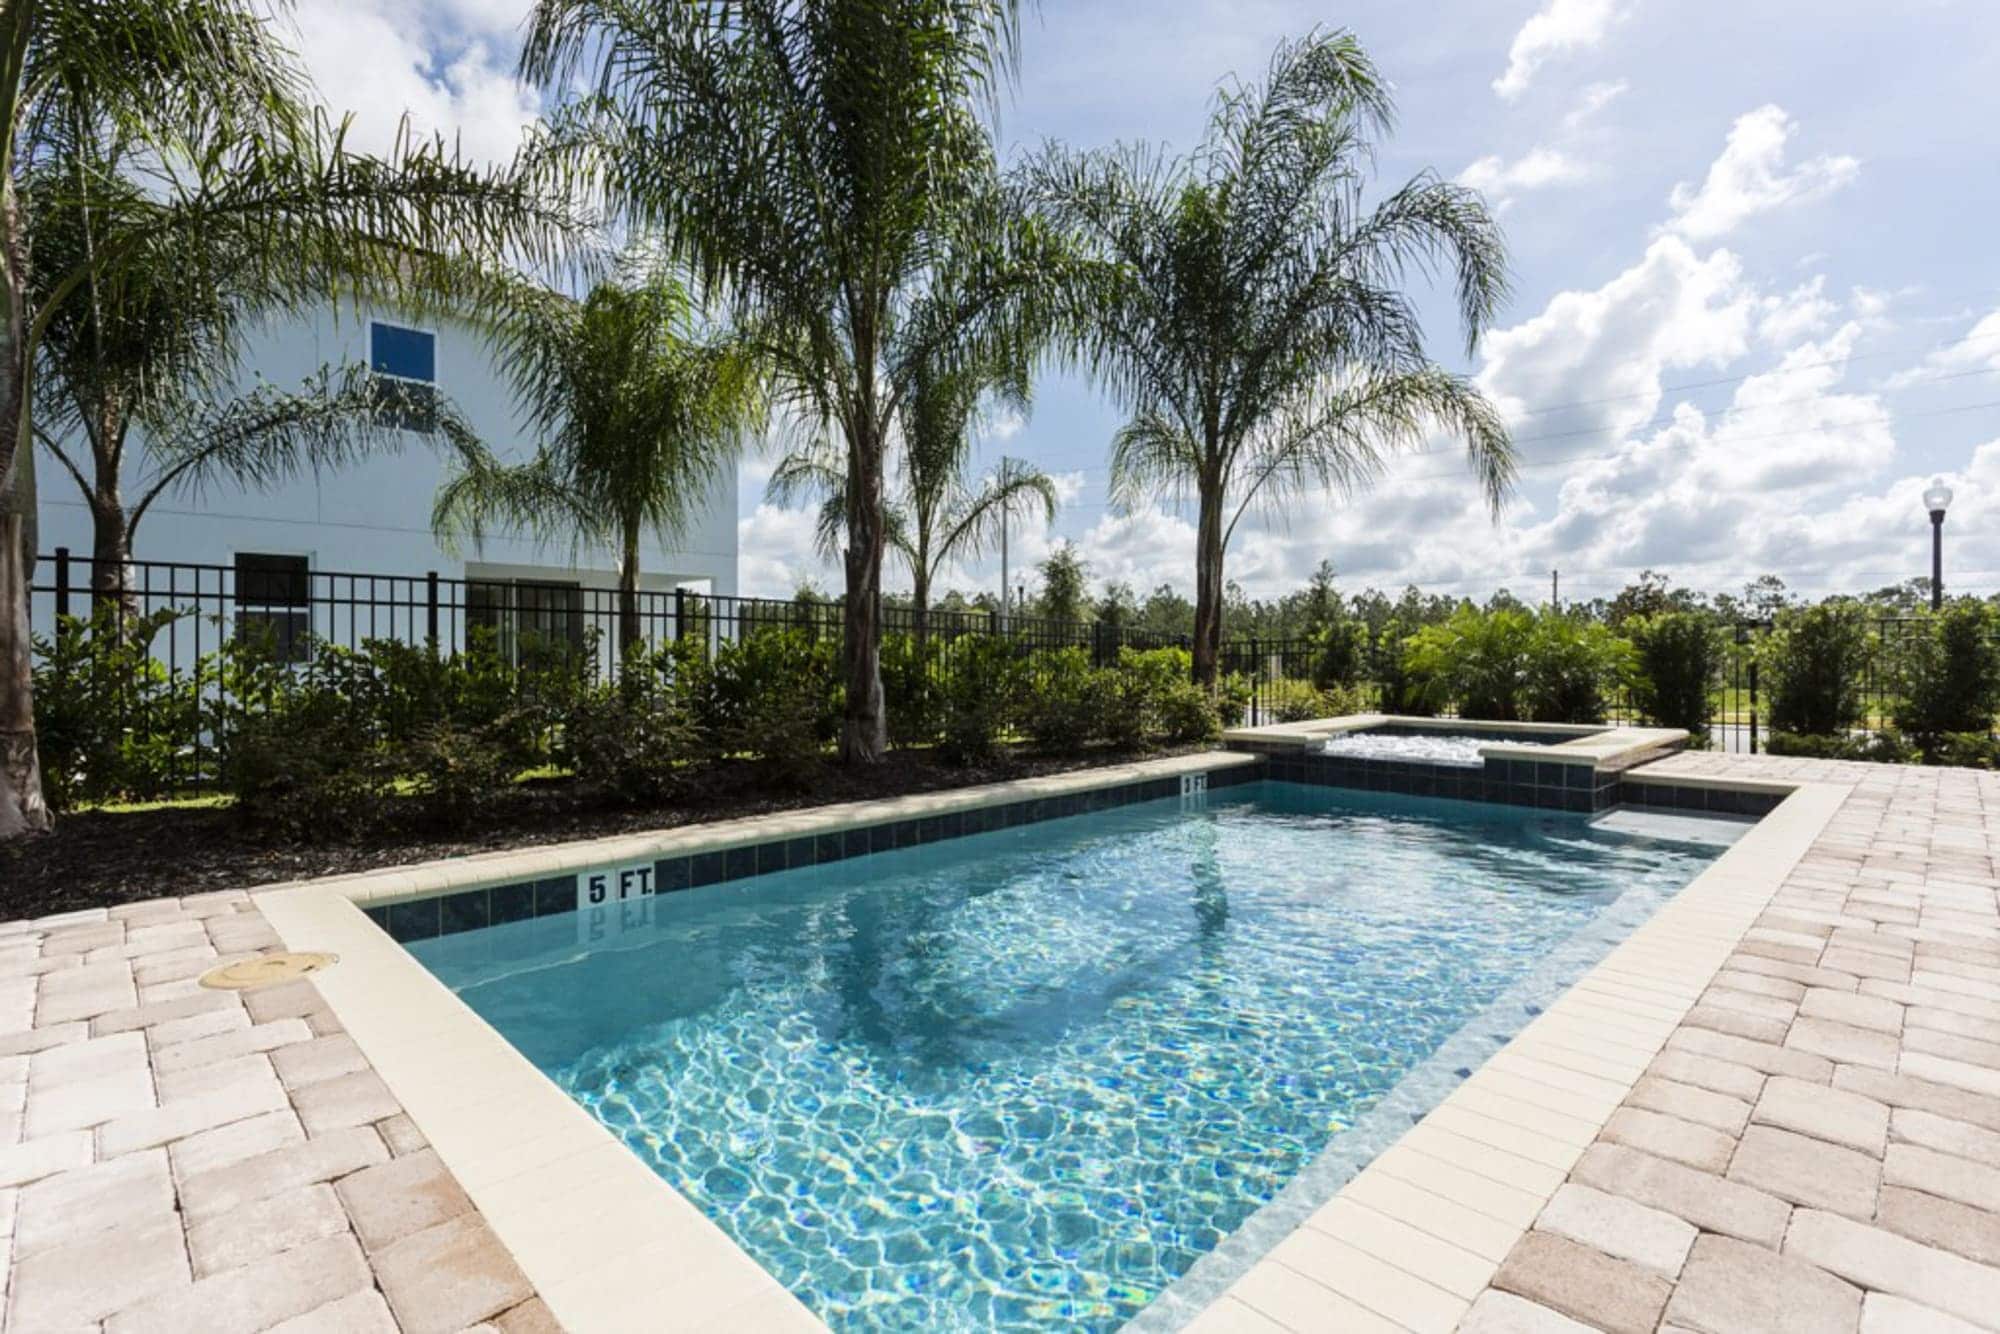 Property Image 1 - Stunning 7BR Resort Home with Private Pool, Hot Tub and BBQ, near Disney!